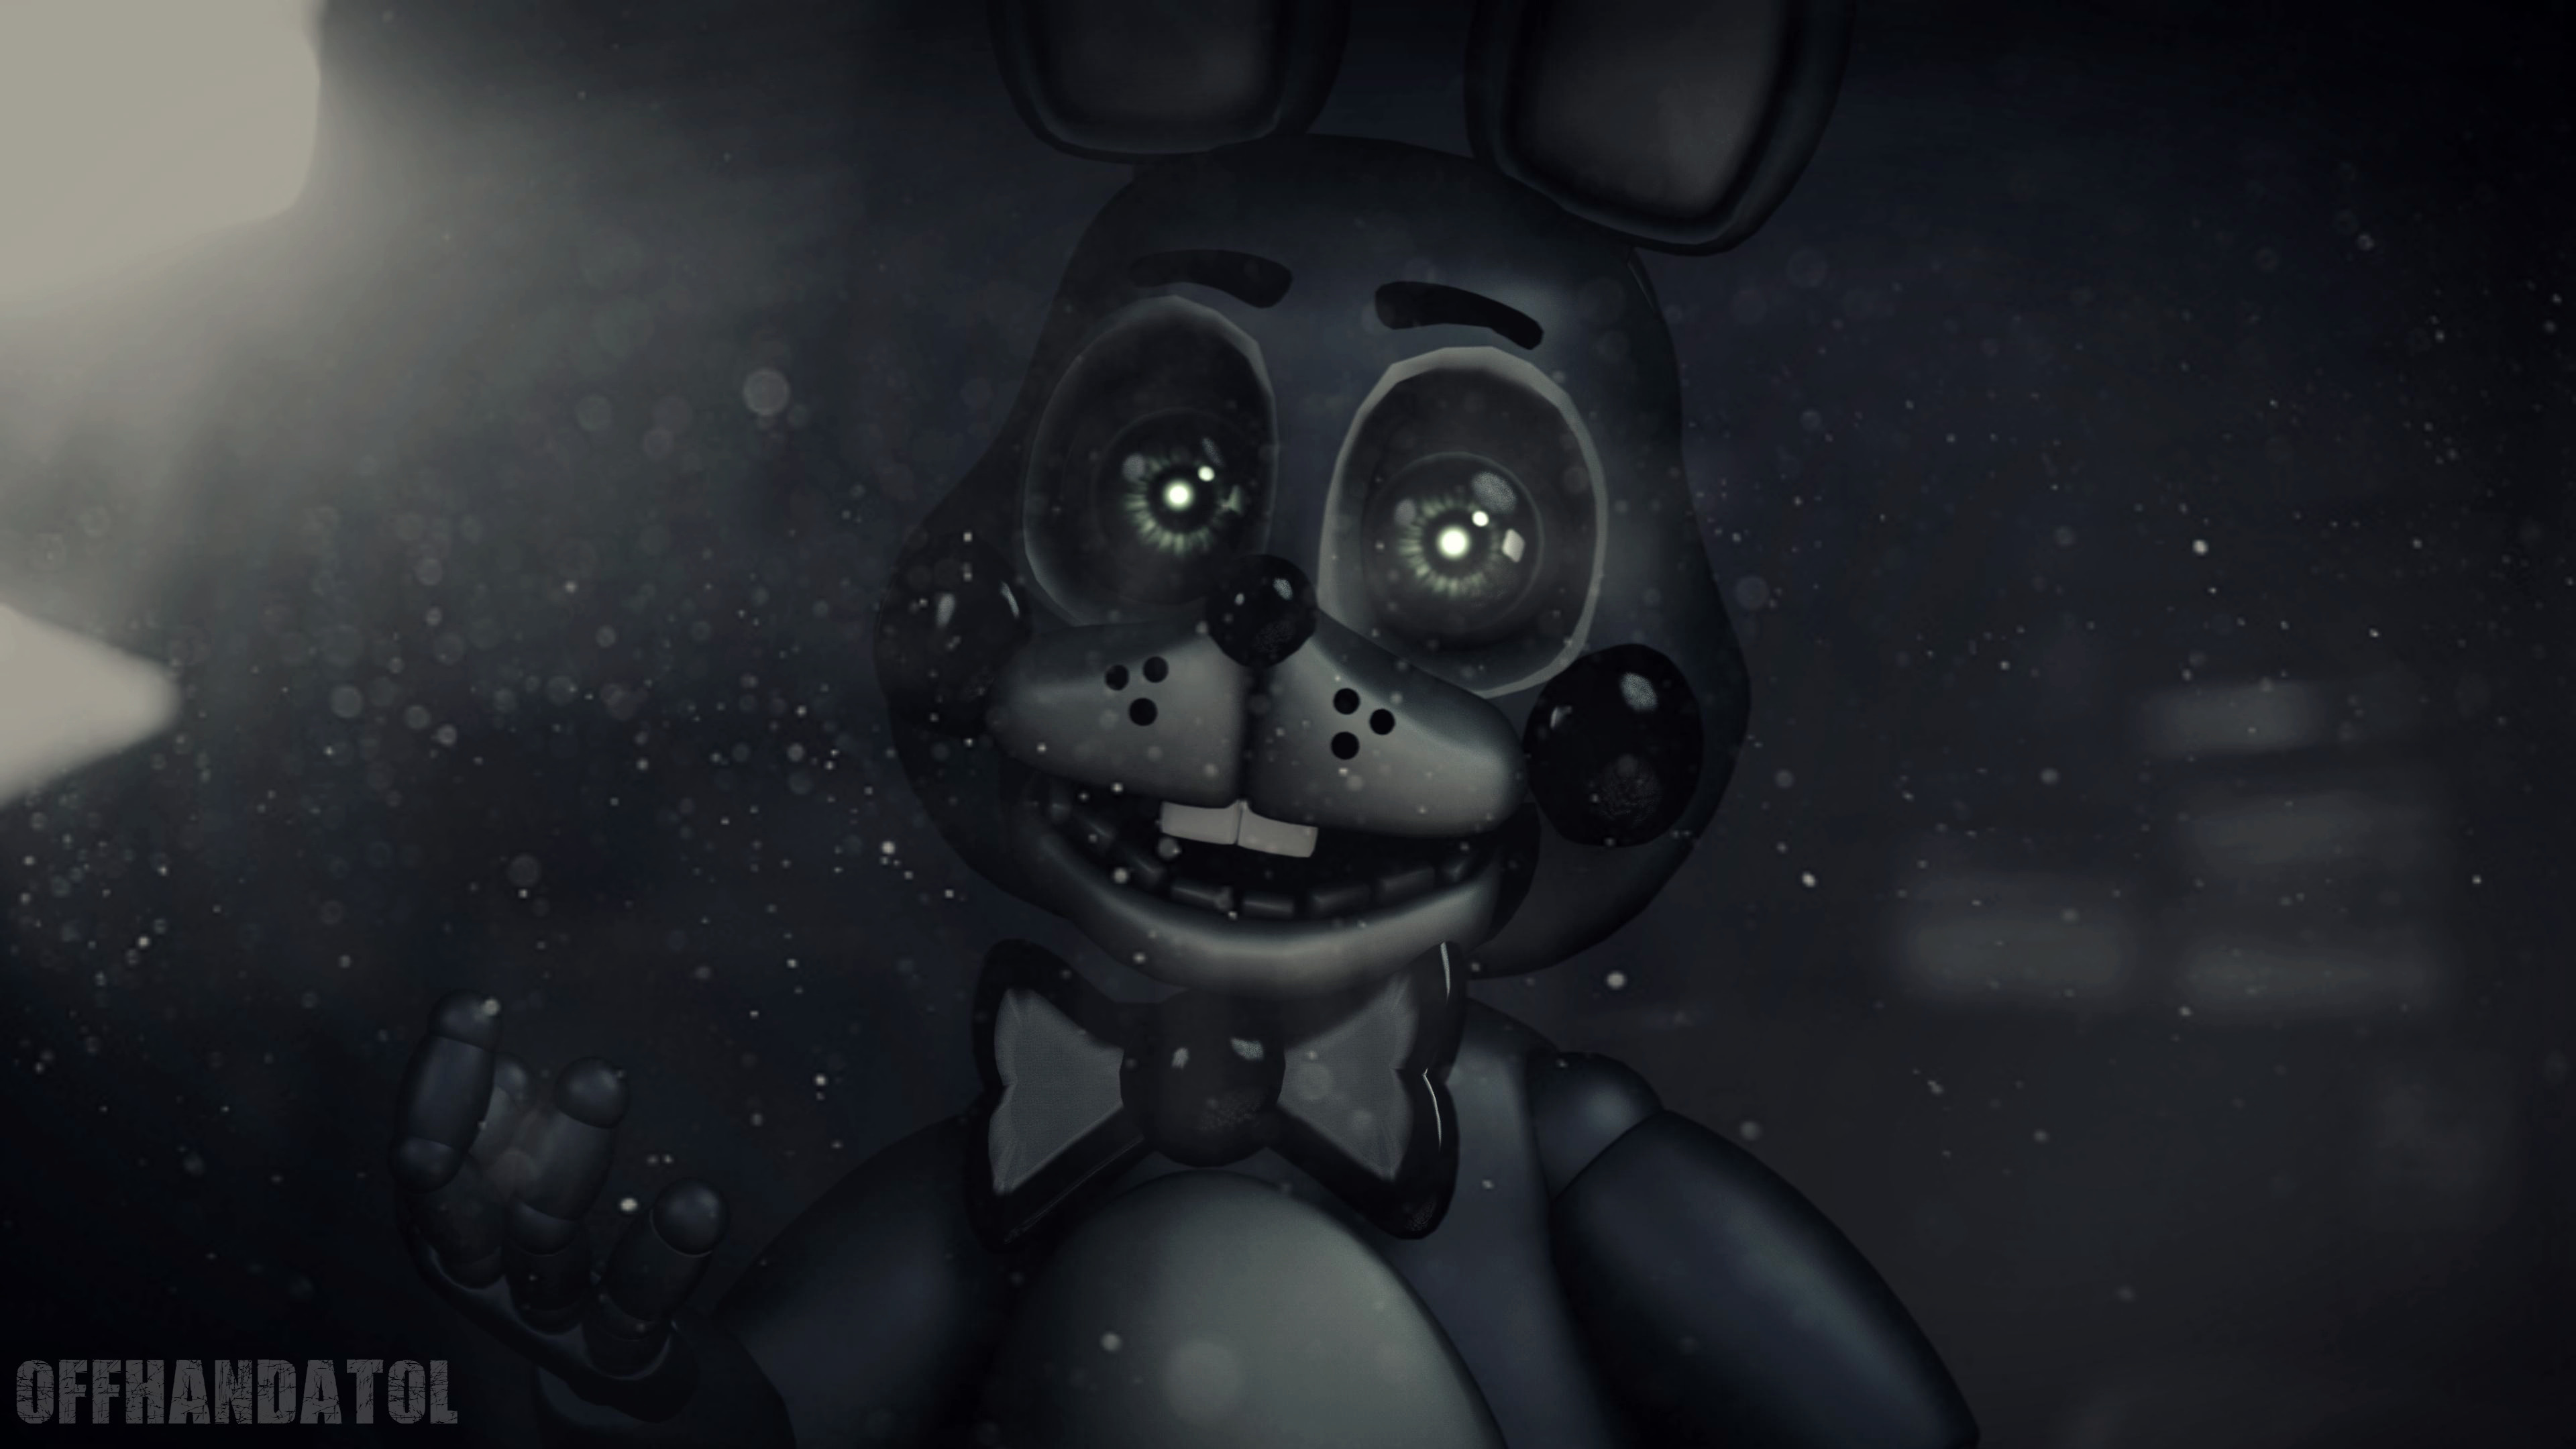 20 Bonnie Five Nights at Freddys HD Wallpapers and Backgrounds